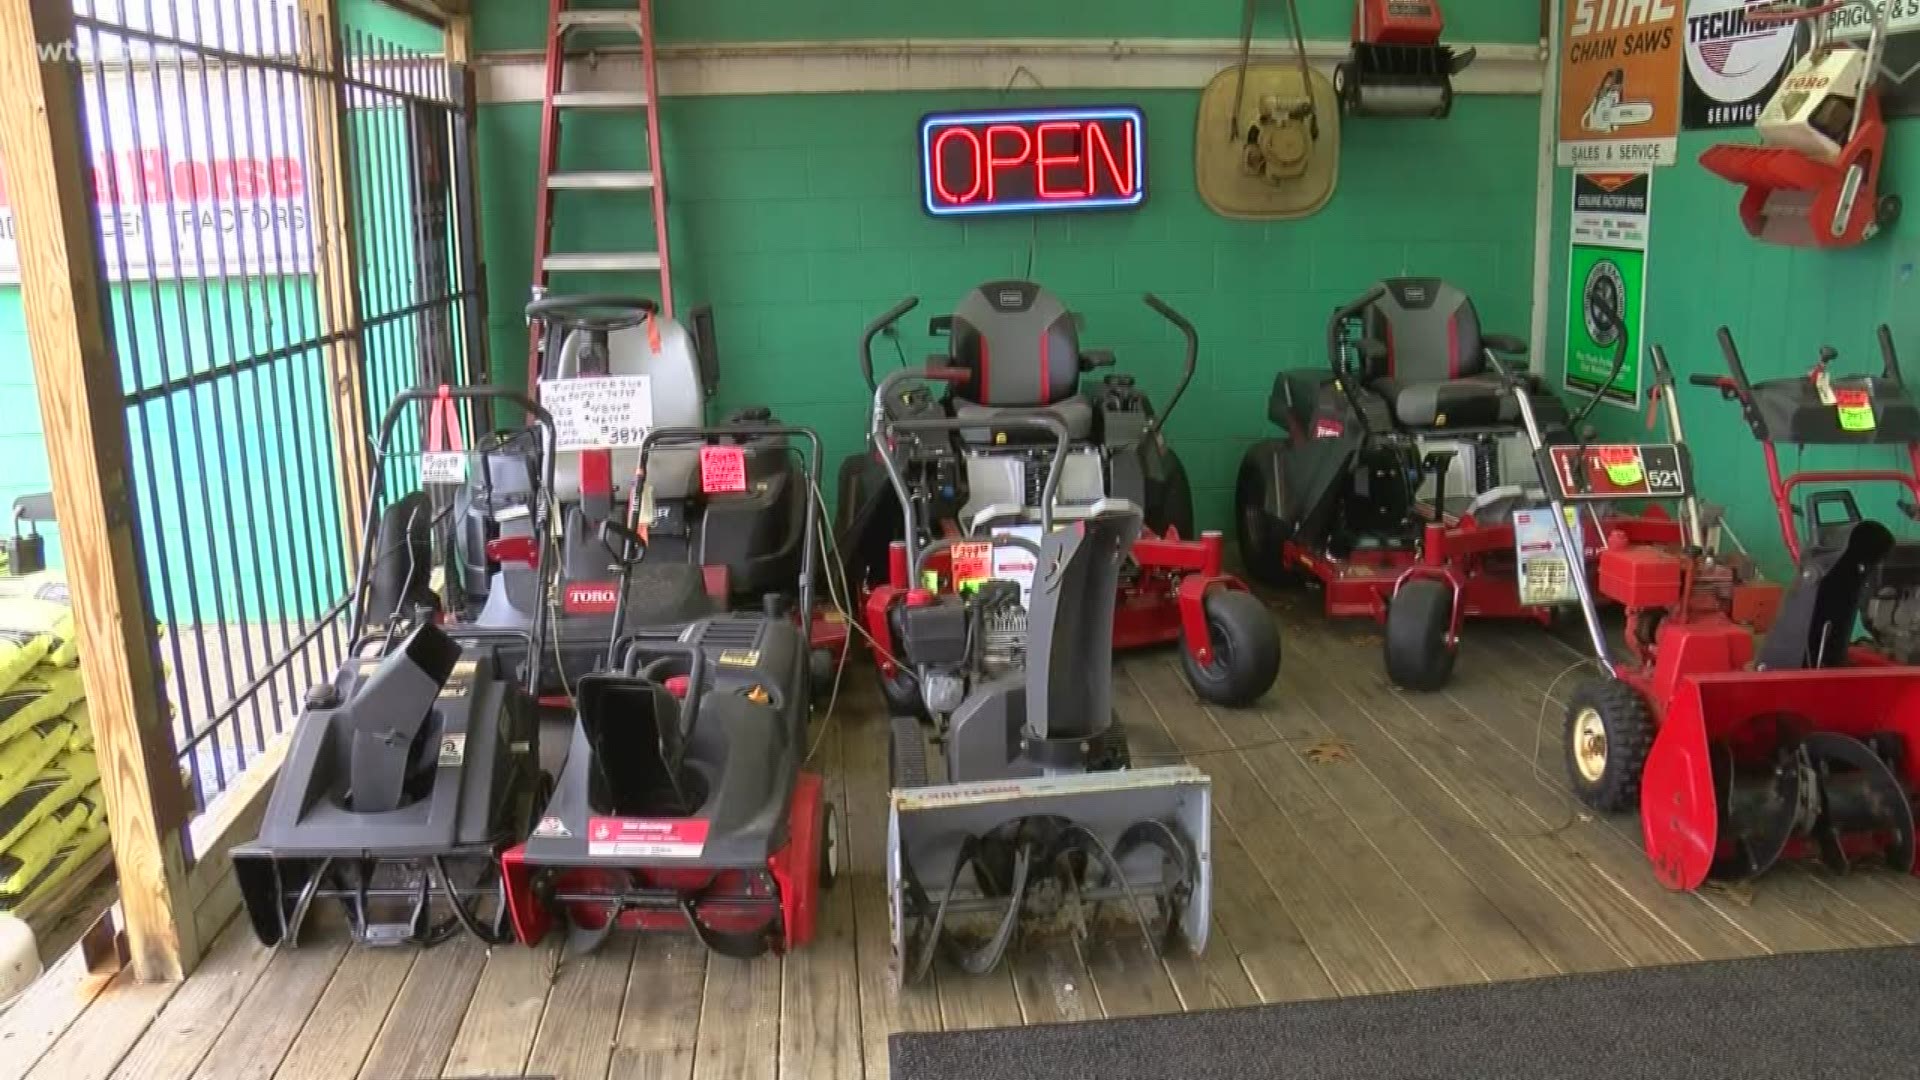 The lack of snow means things have been slow for businesses that sell and repair snowblowers. The weekend snow storm is bringing hope.